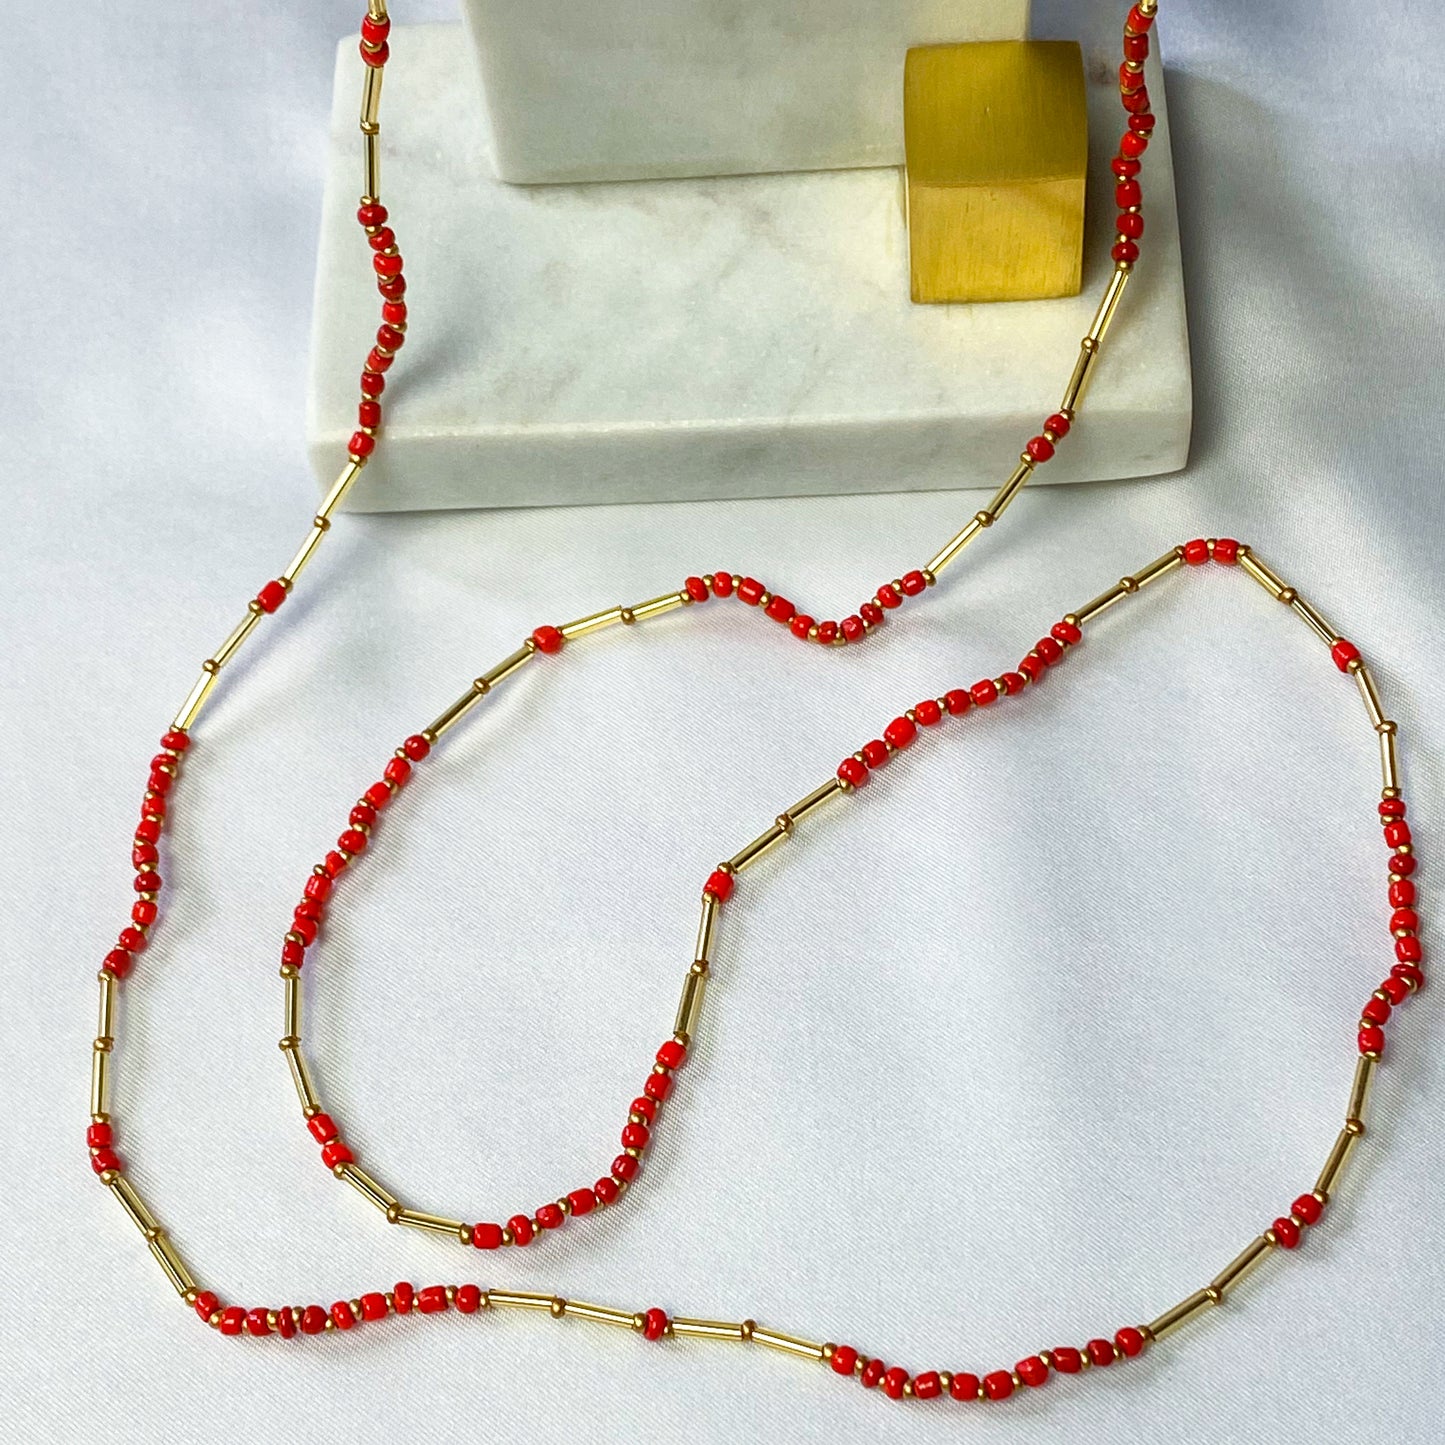 Coral and Gold Waist Bead